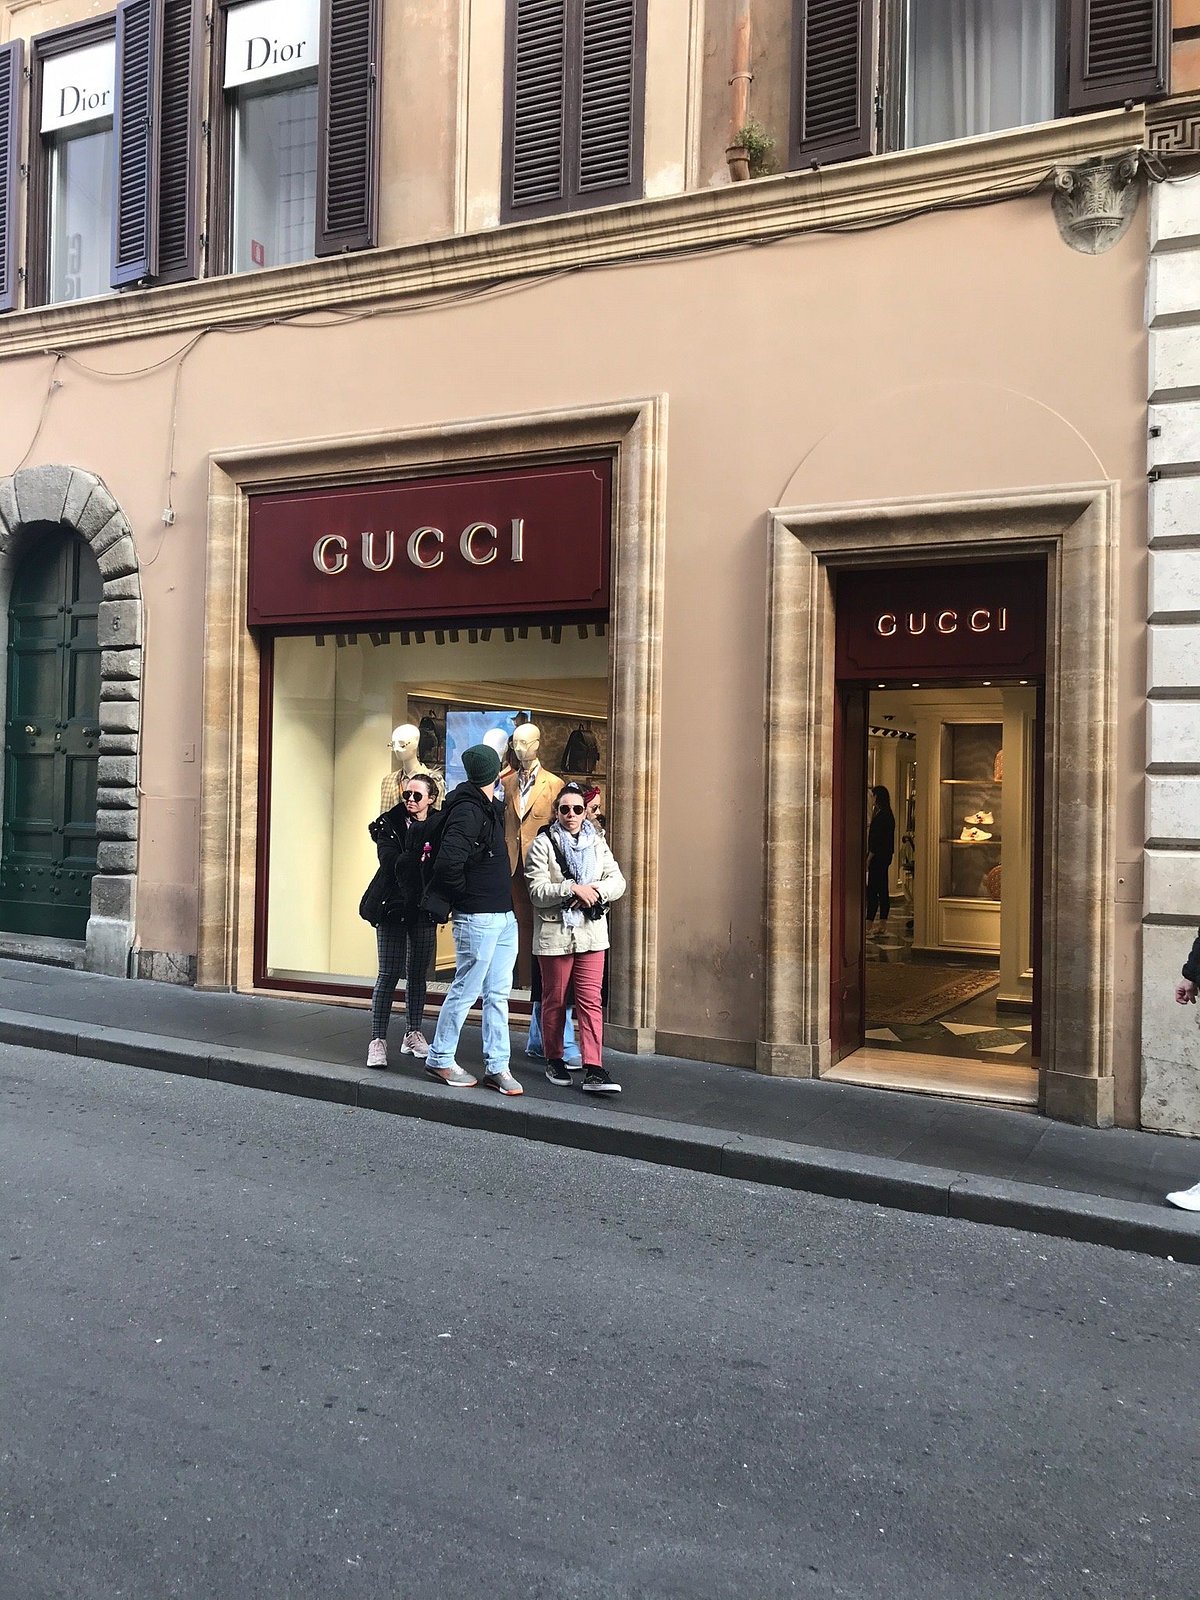 GUCCI OUTLET SHOPPING VLOG, Come Shopping With Me To The Gucci Outlet